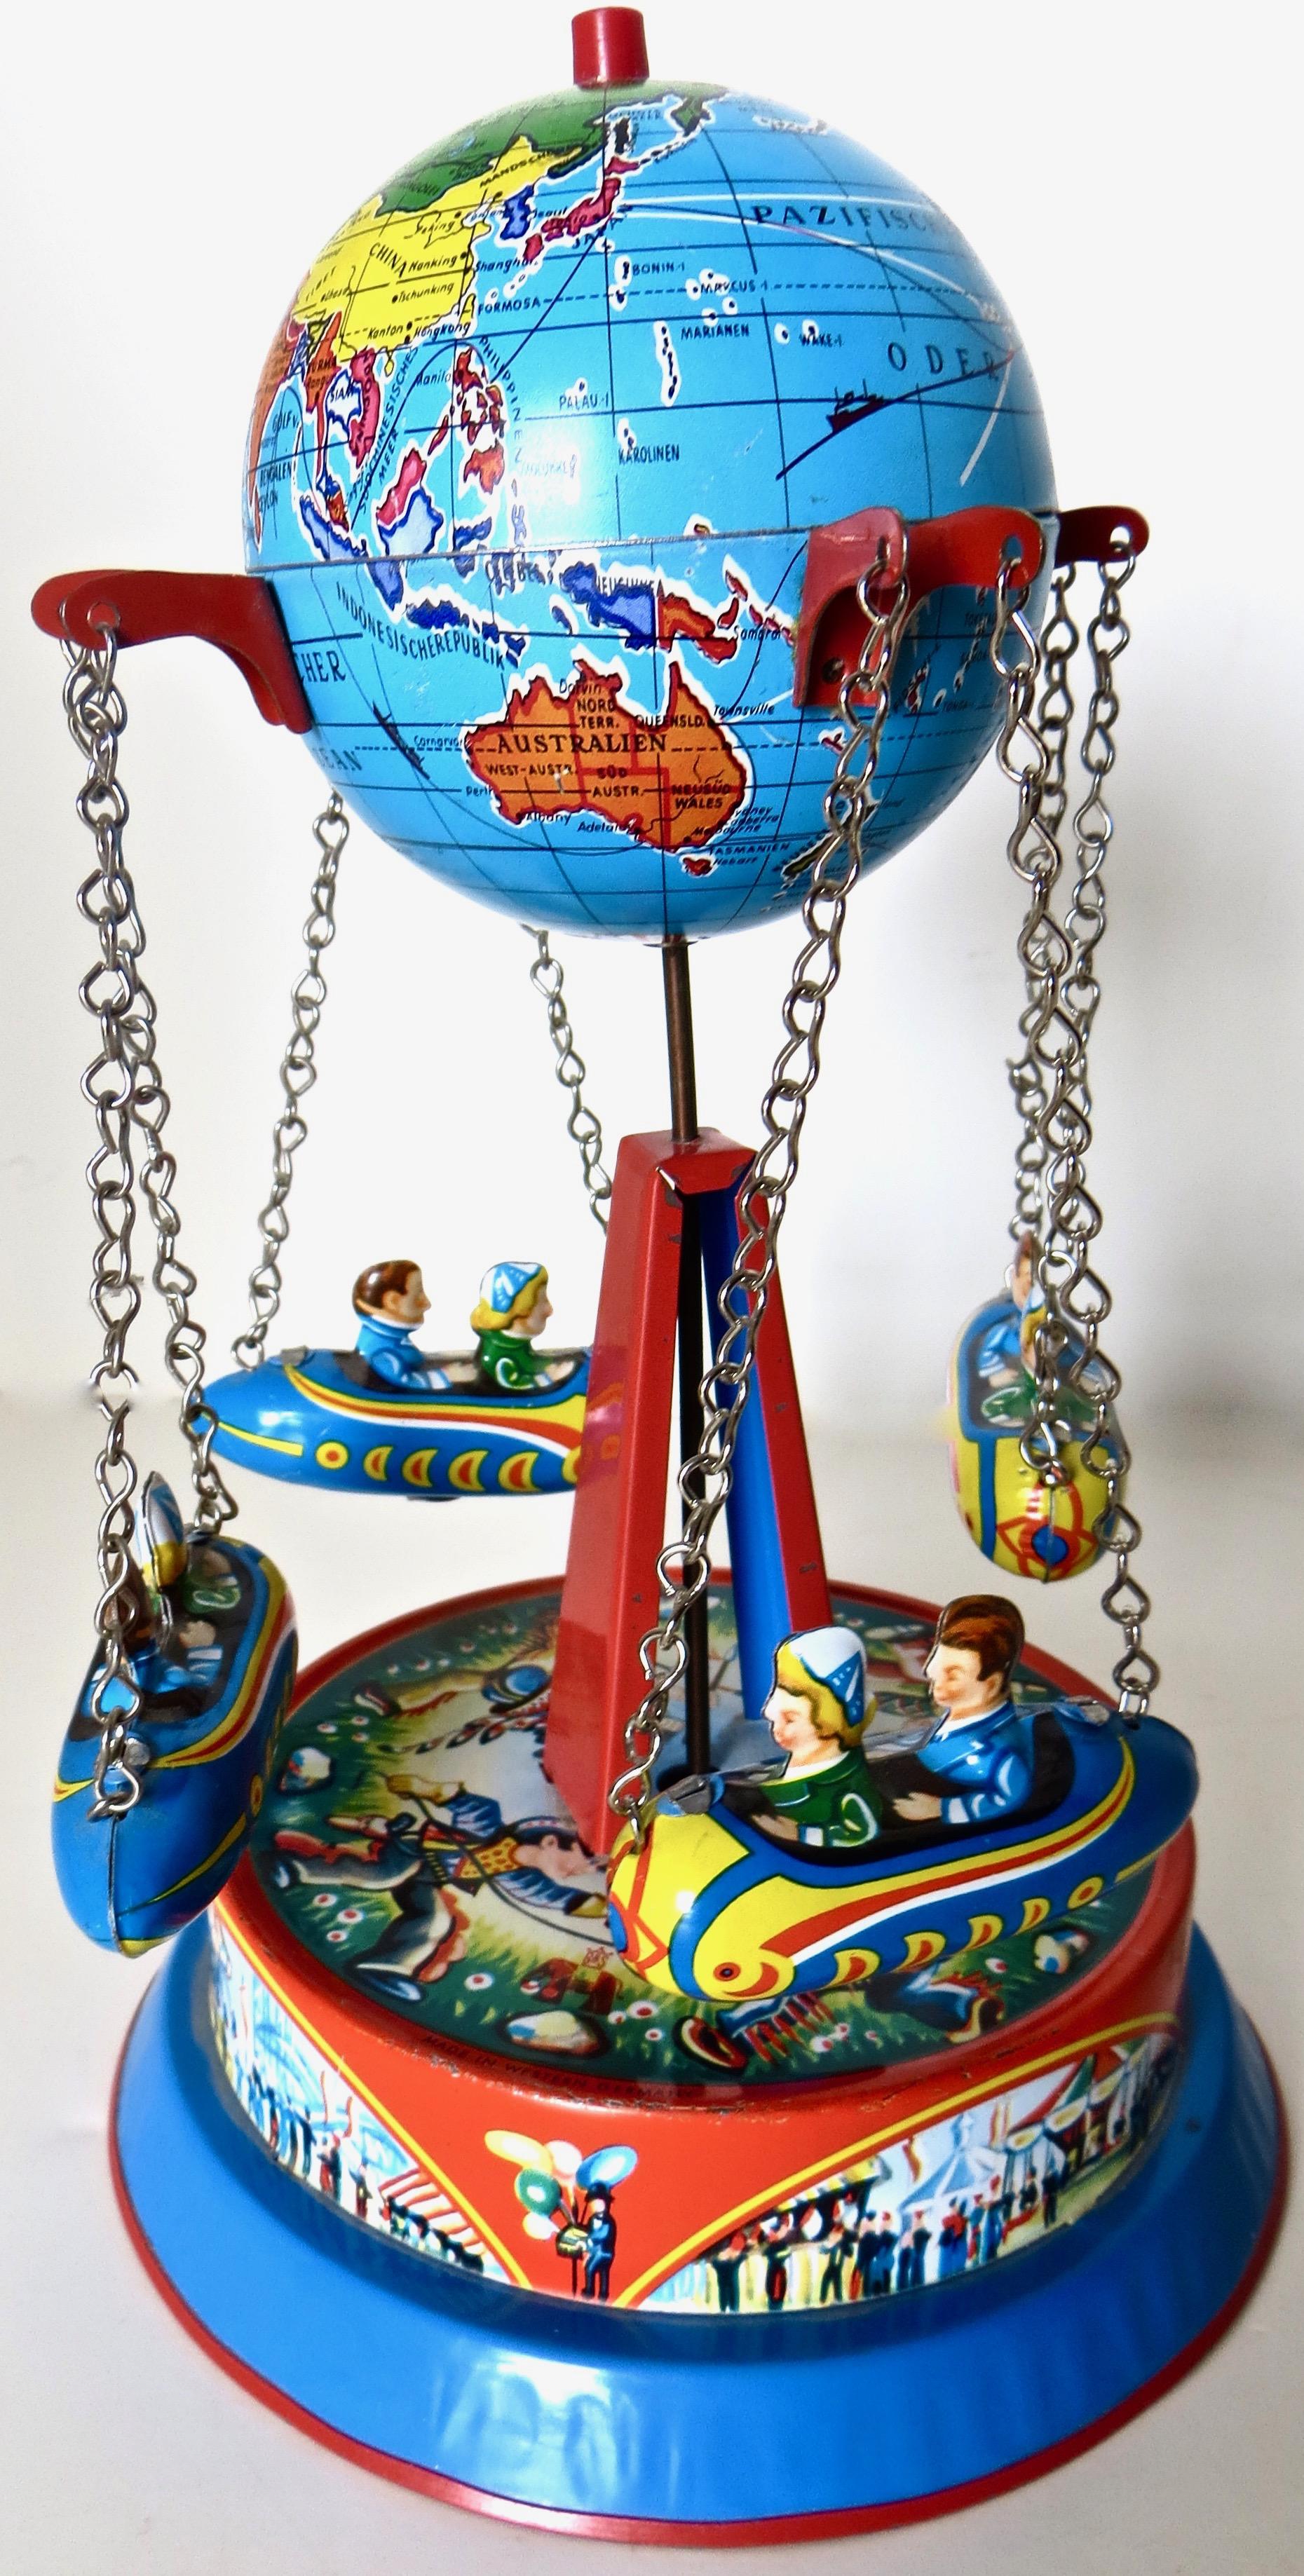 Spring loaded carousel rocket ride toy with a world globe 